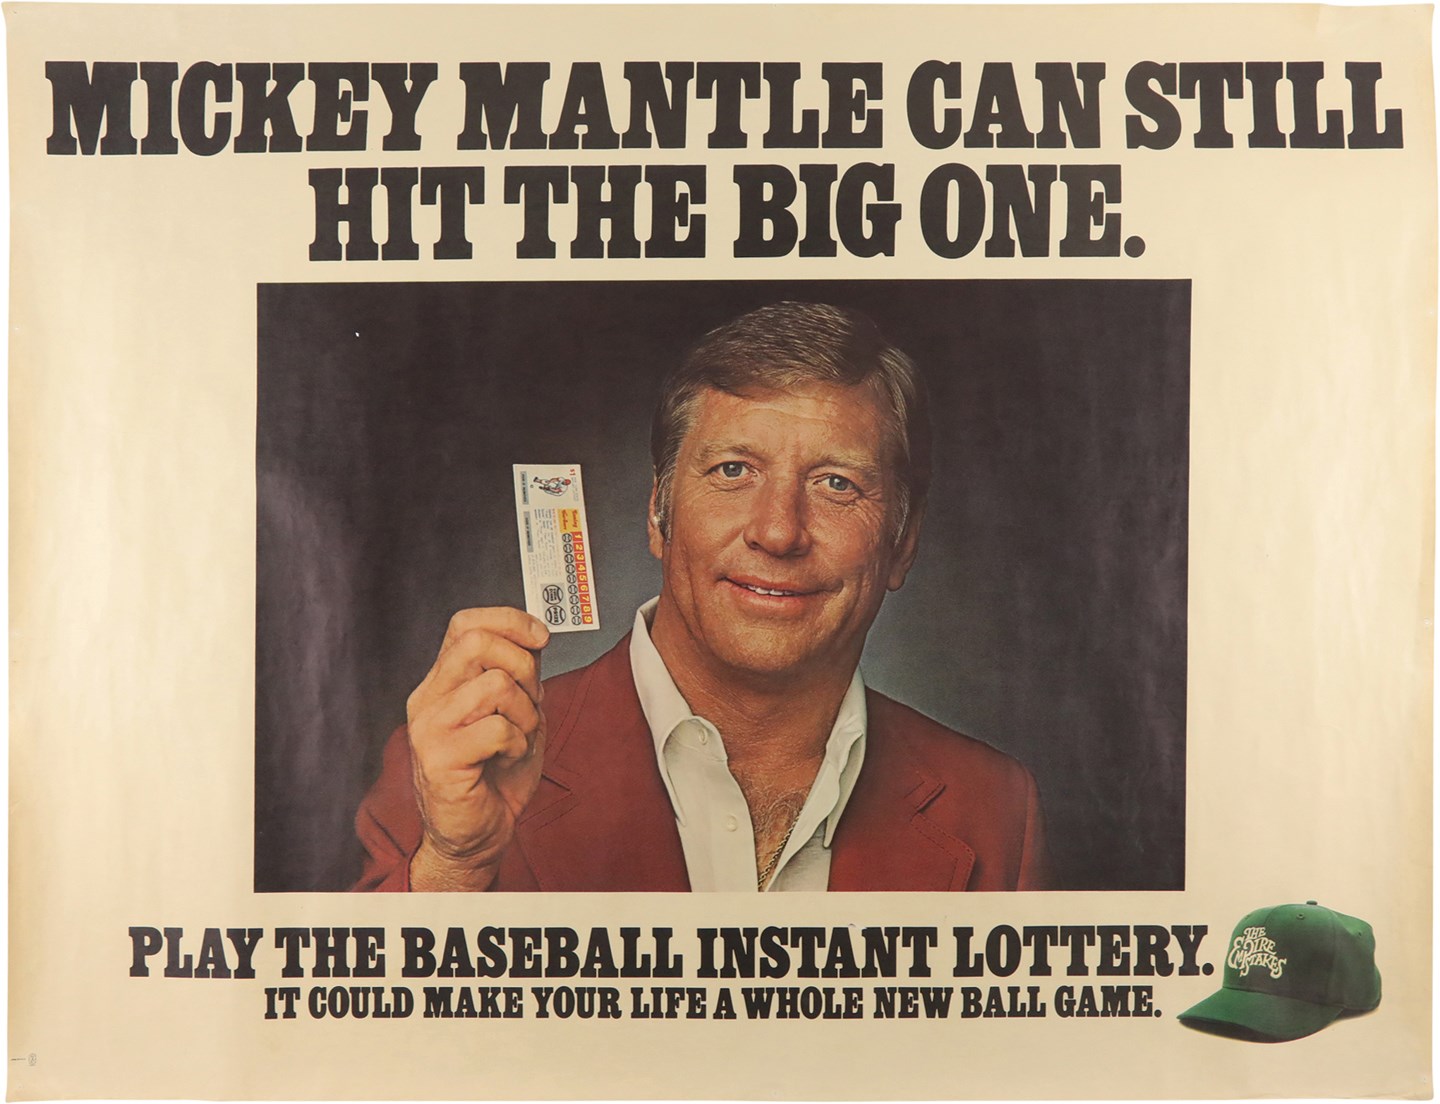 Mantle and Maris - Enormous 1982 Mickey Mantle Lottery Poster